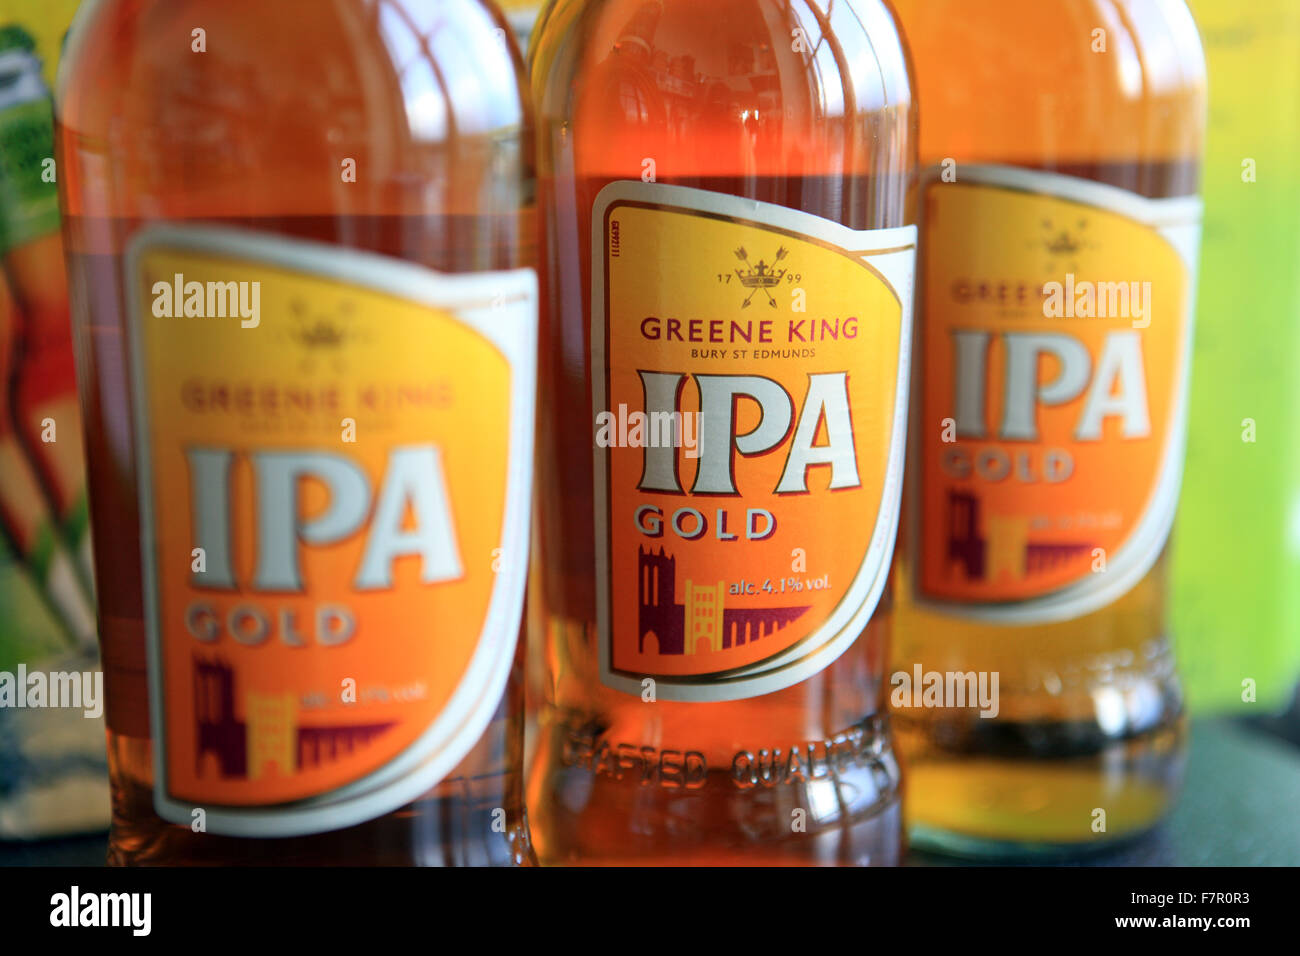 Bottles of IPA (India Pale Ale) Gold by Greene King Brewery in the UK Stock Photo